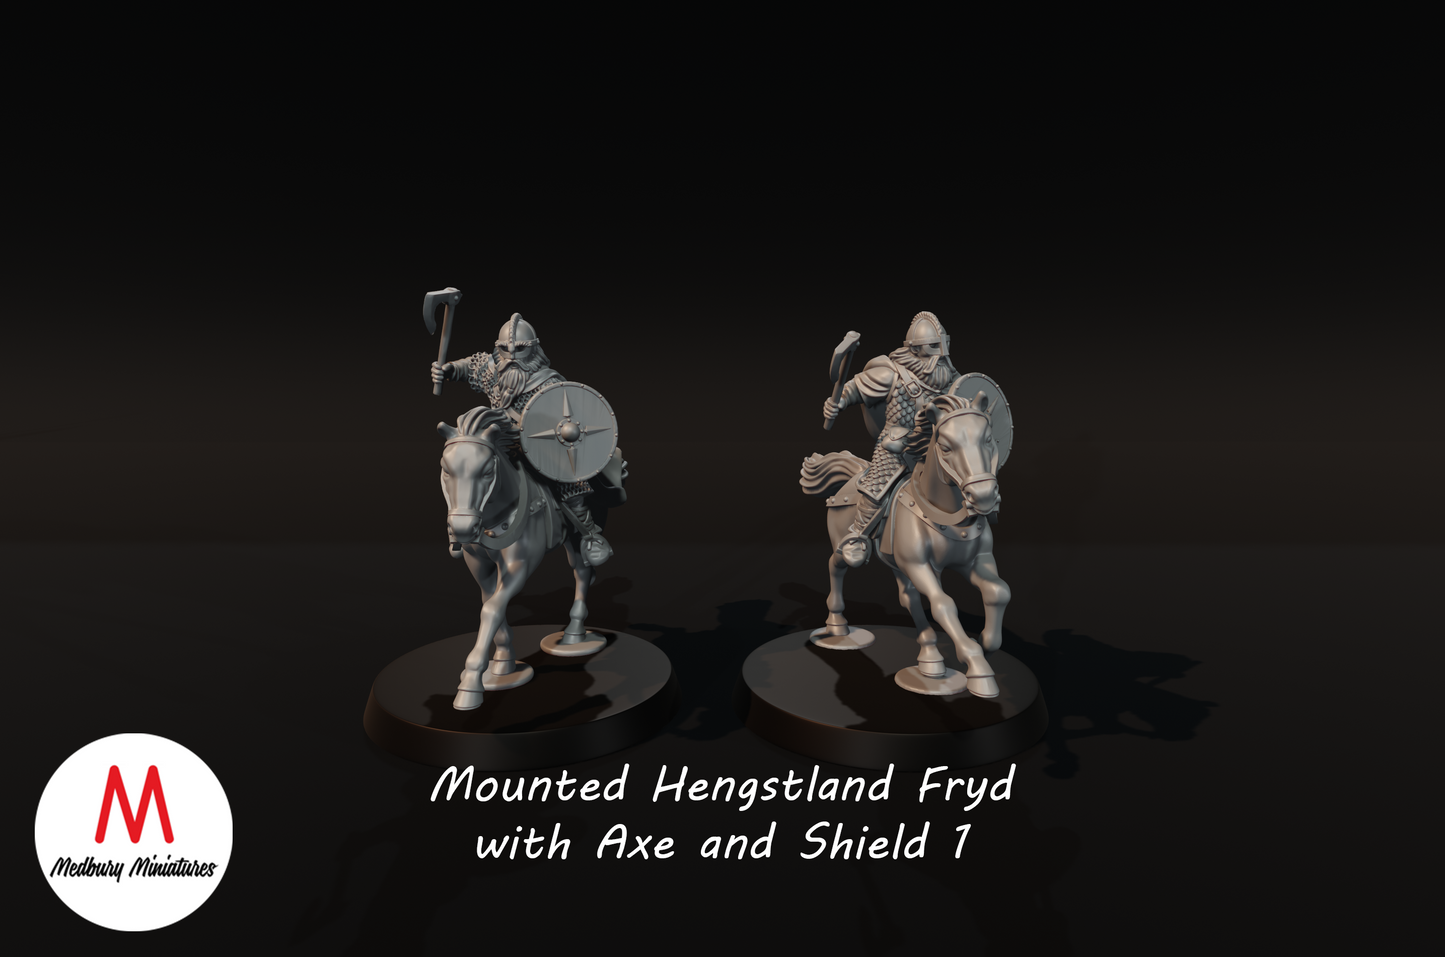 Mounted Hengstland Fryd with axe and shield 1